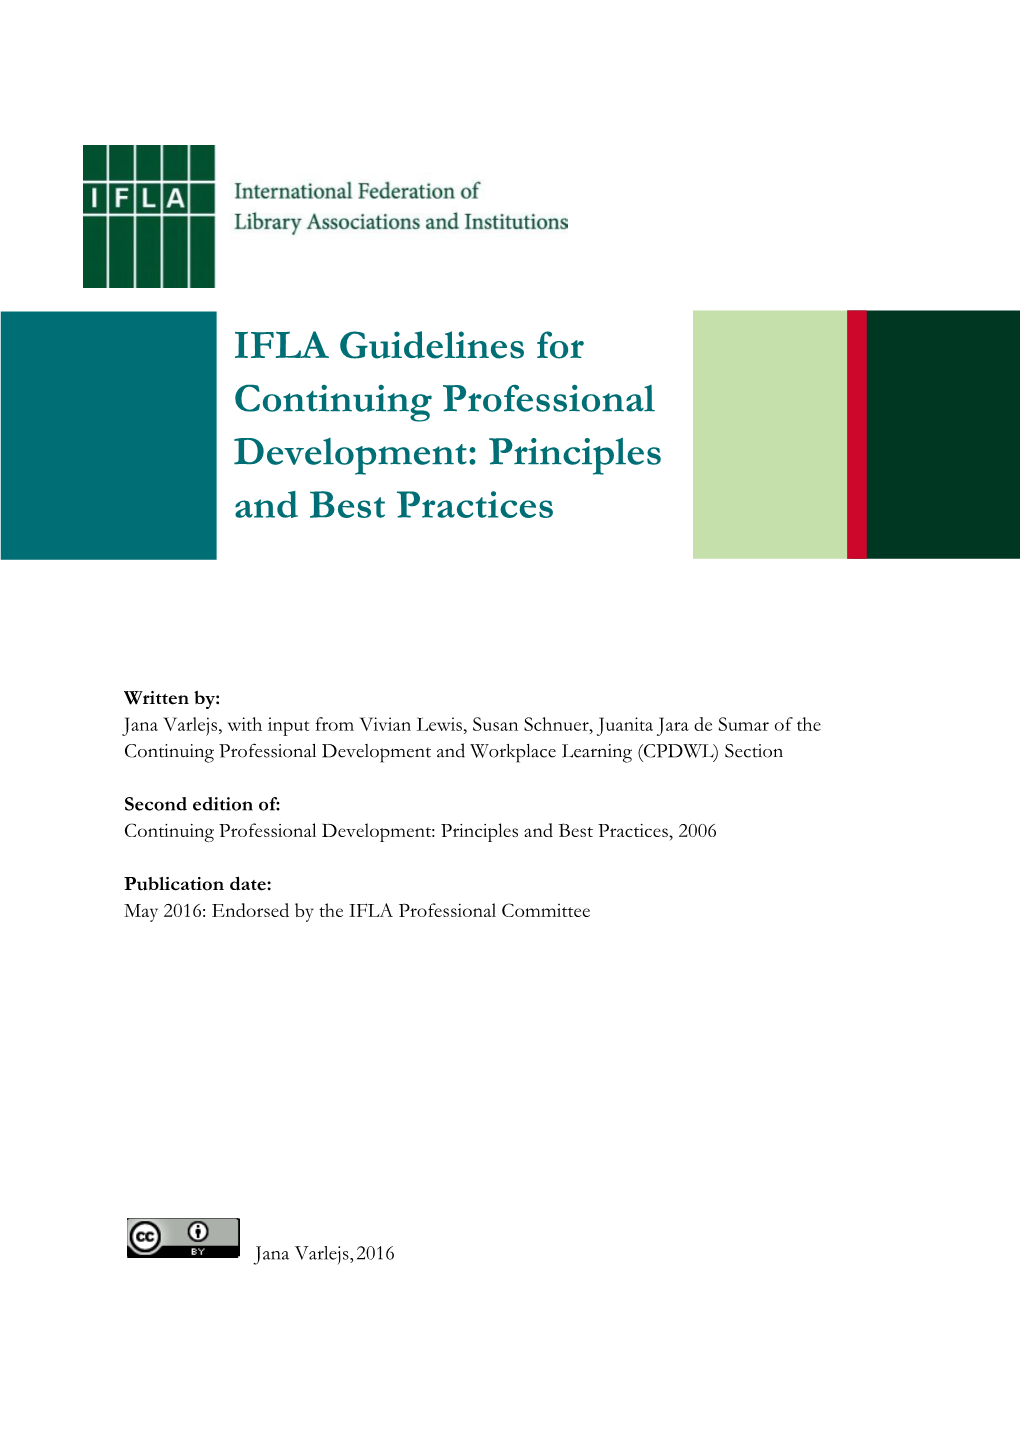 IFLA Guidelines for Continuing Professional Development: Principles and Best Practices